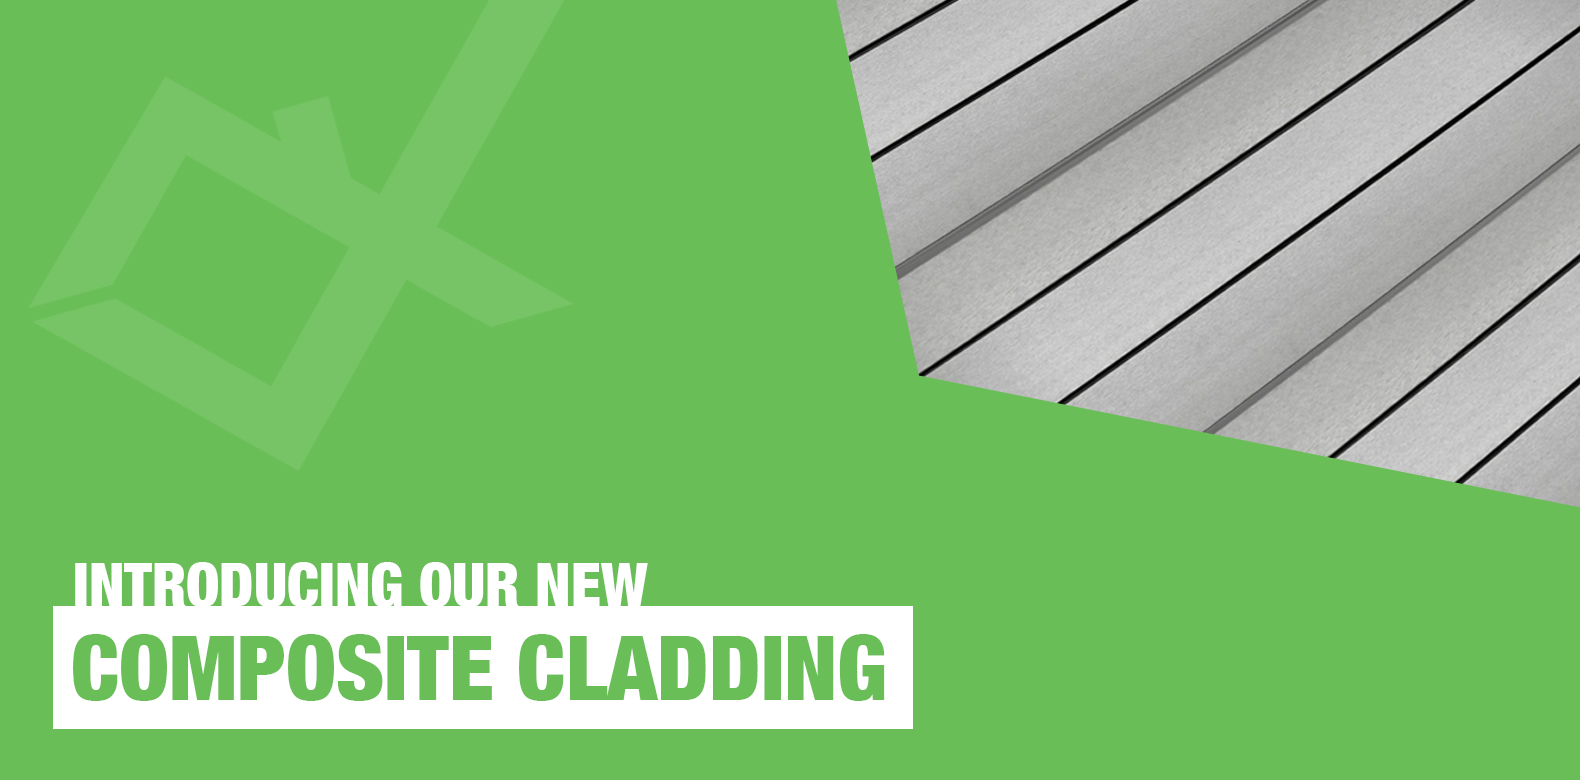 Introducing Our New Composite Cladding